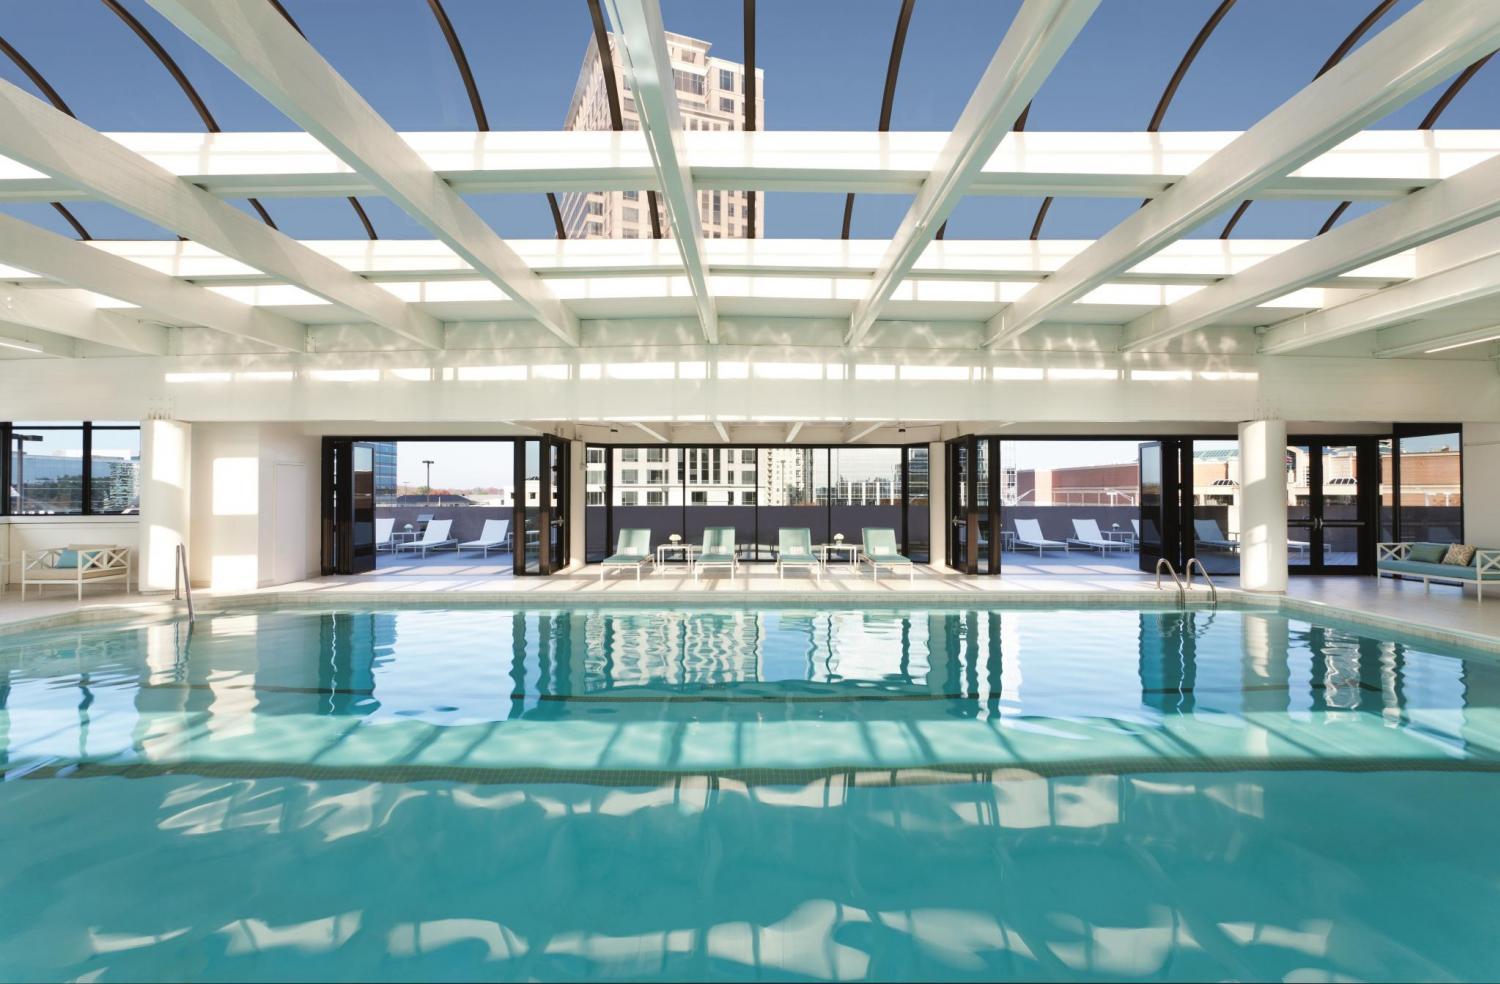 The revived indoor pool at The Whitley.